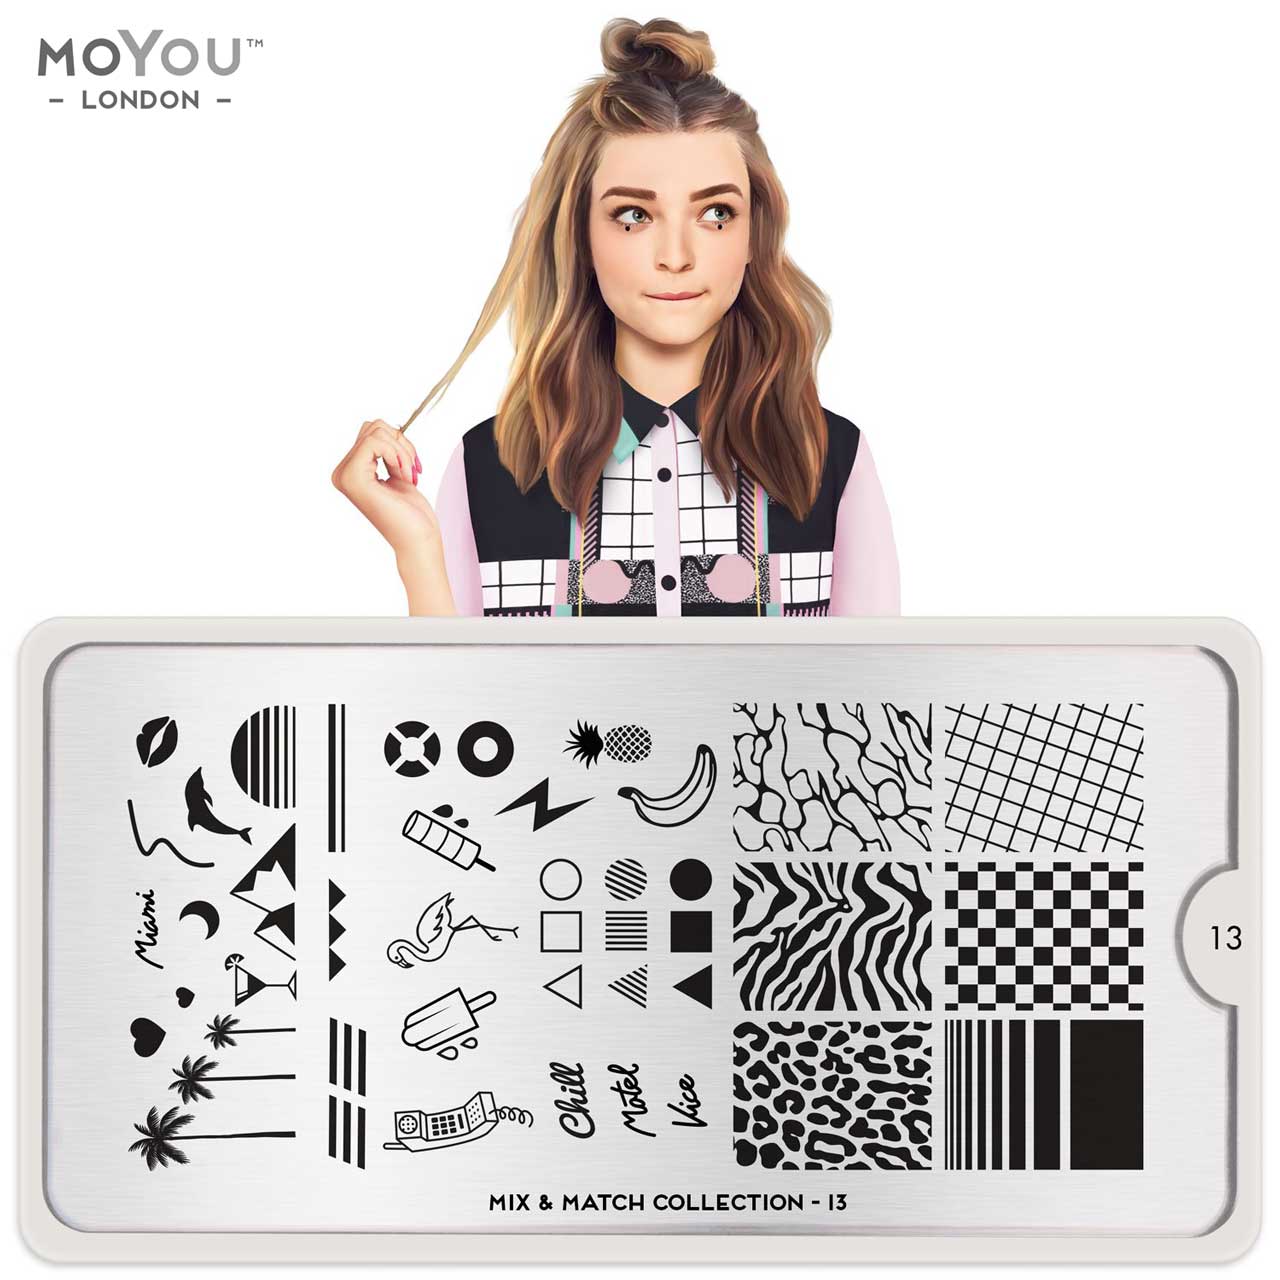 Plaque Stamping Mix and Match 13 - MoYou London